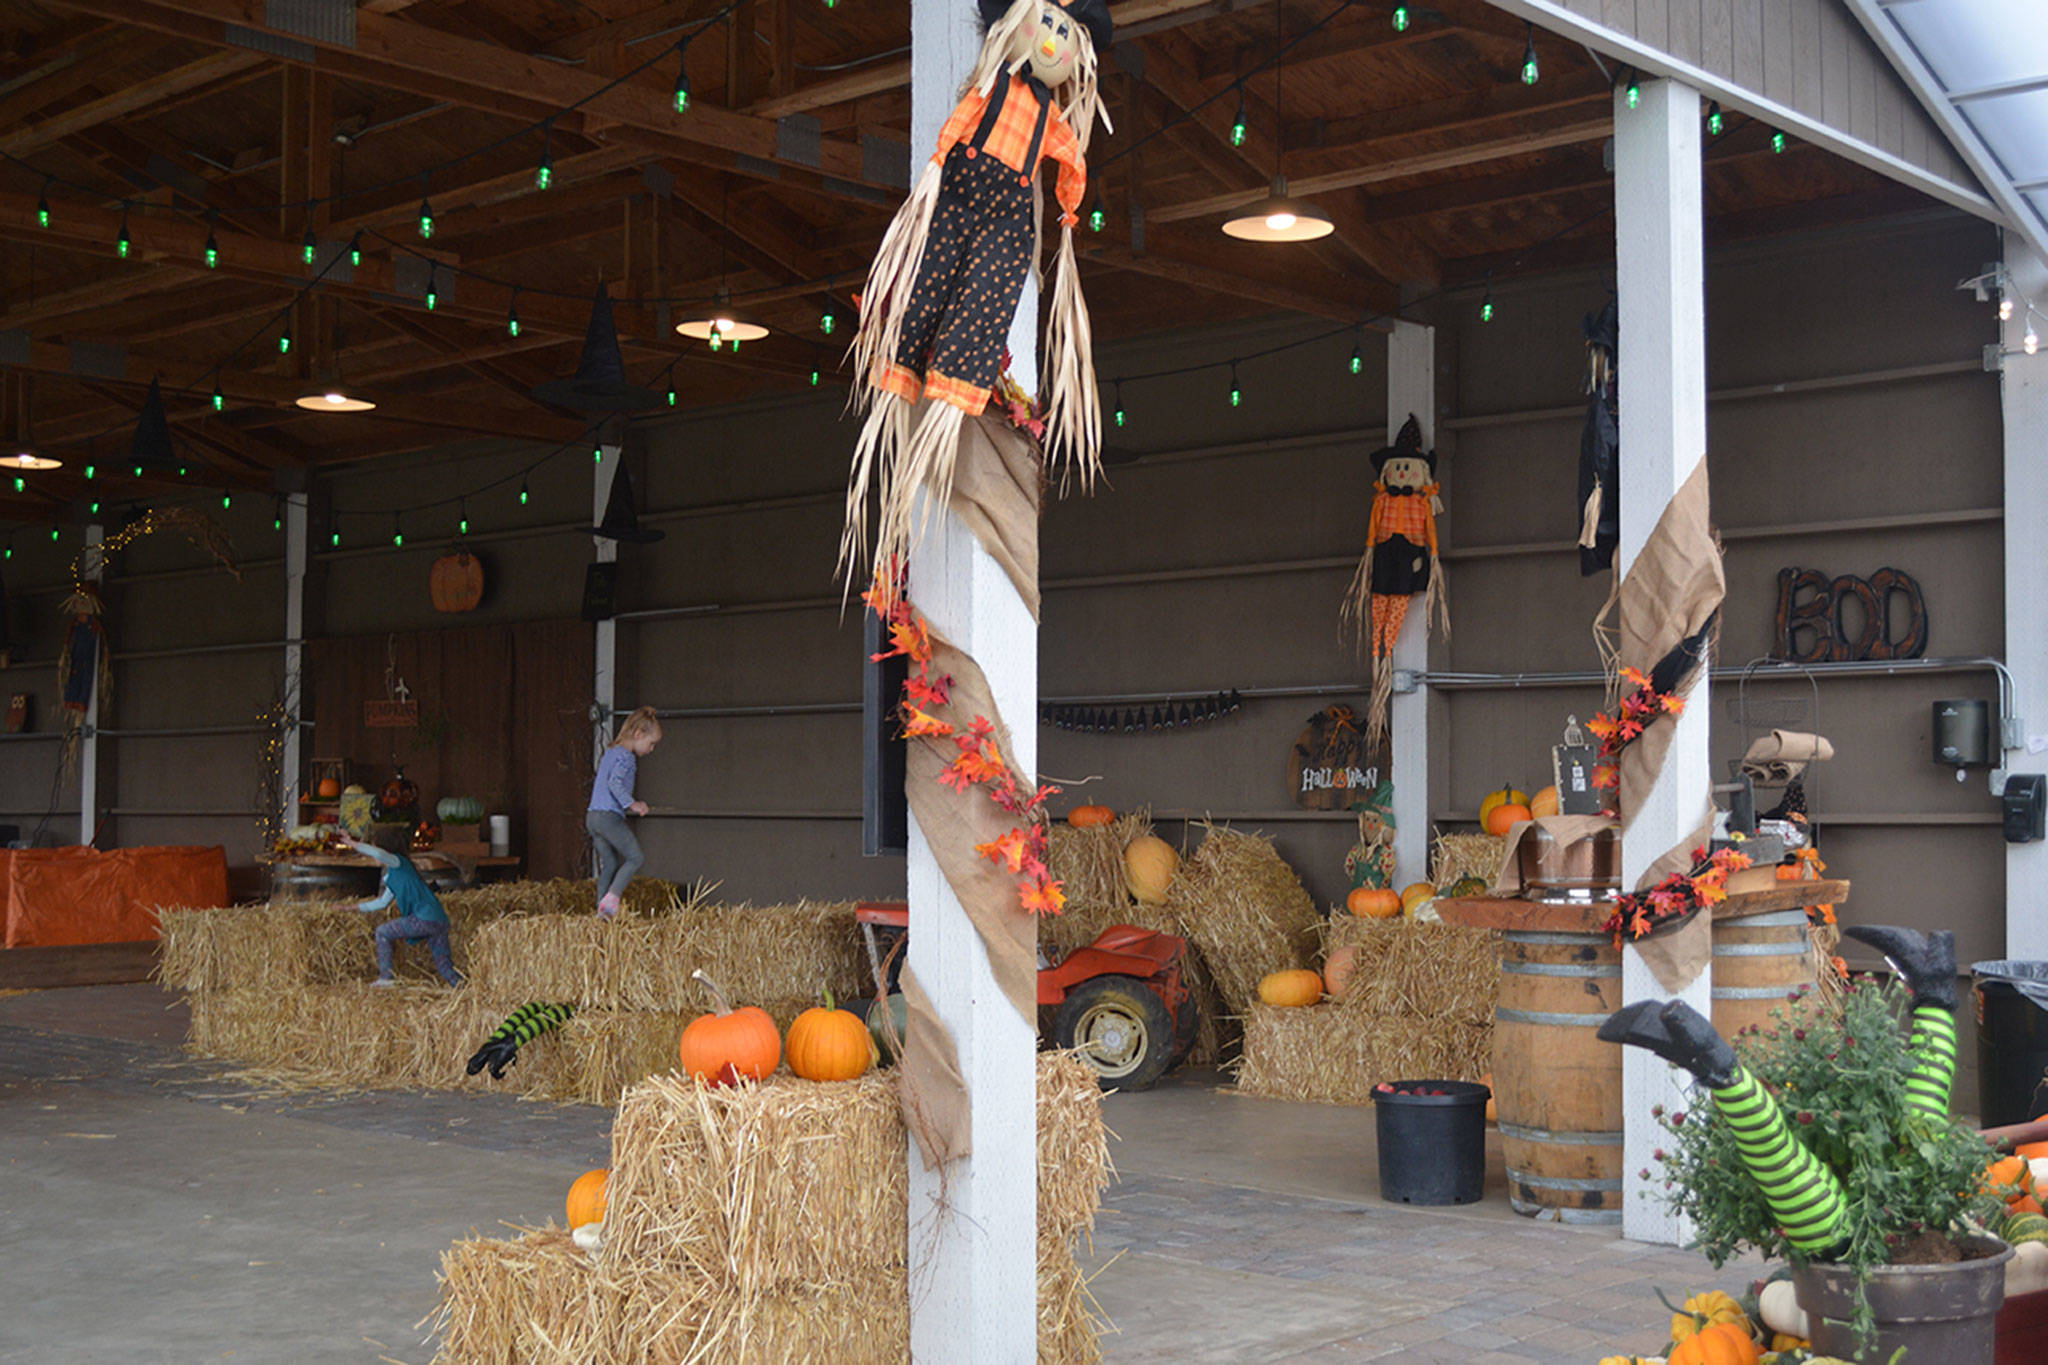 Lovin’ it: This outdoor pumpkin patch makes it so much easier (slide show)